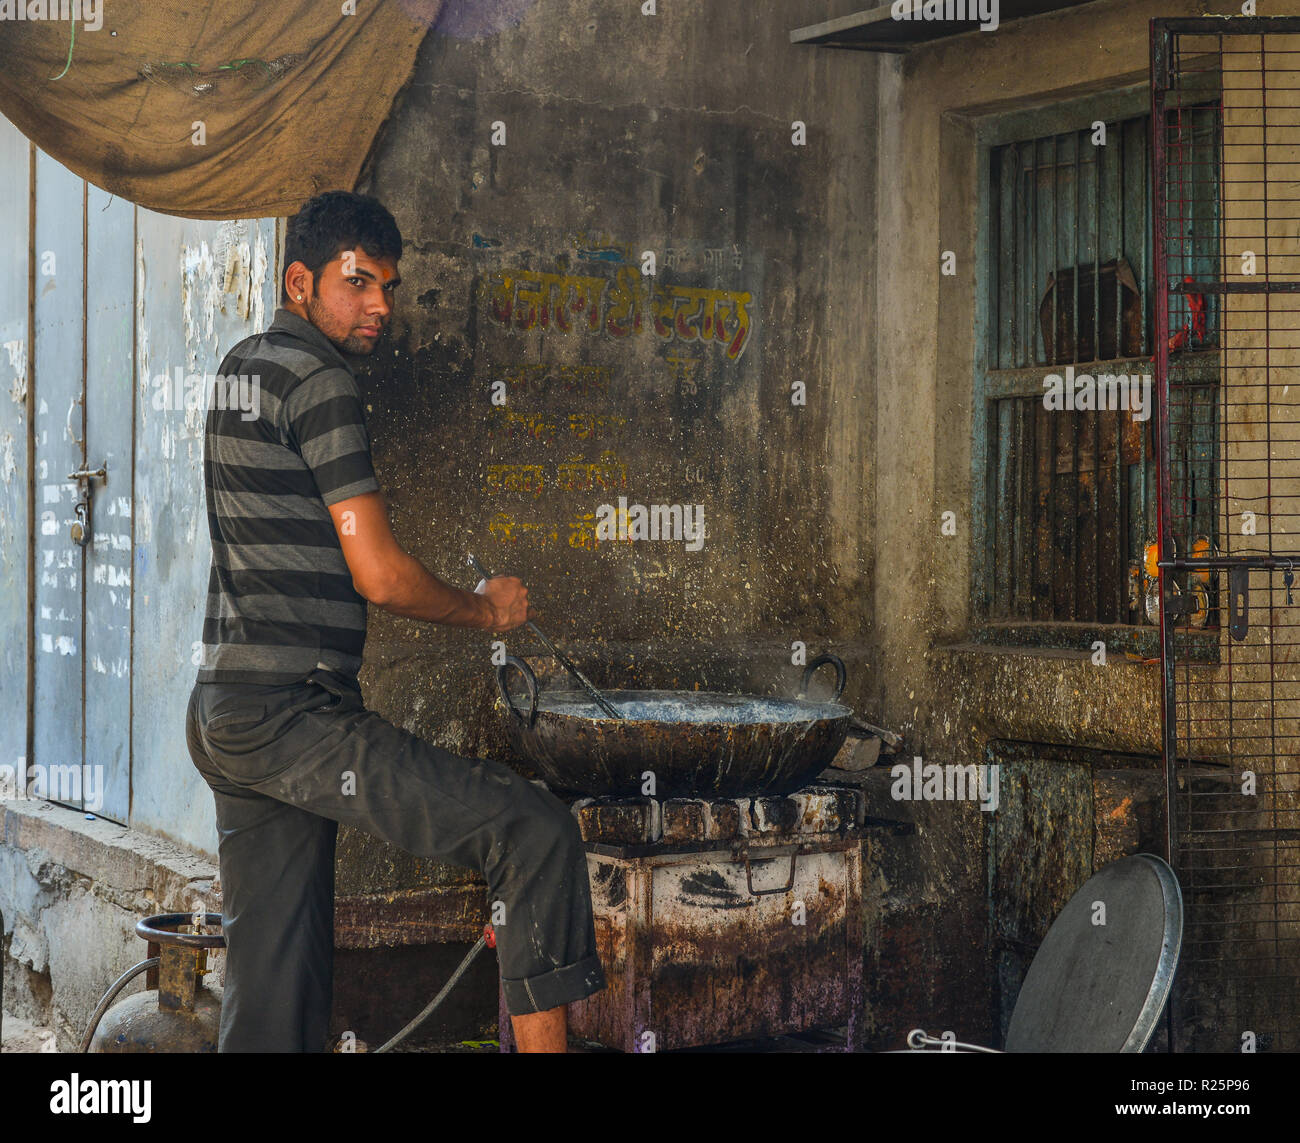 Jodhpur, India - Nov 6, 2017. A man cooking traditional food on street in Jodhpur, India. Jodhpur is the second largest city in state of Rajasthan. Stock Photo